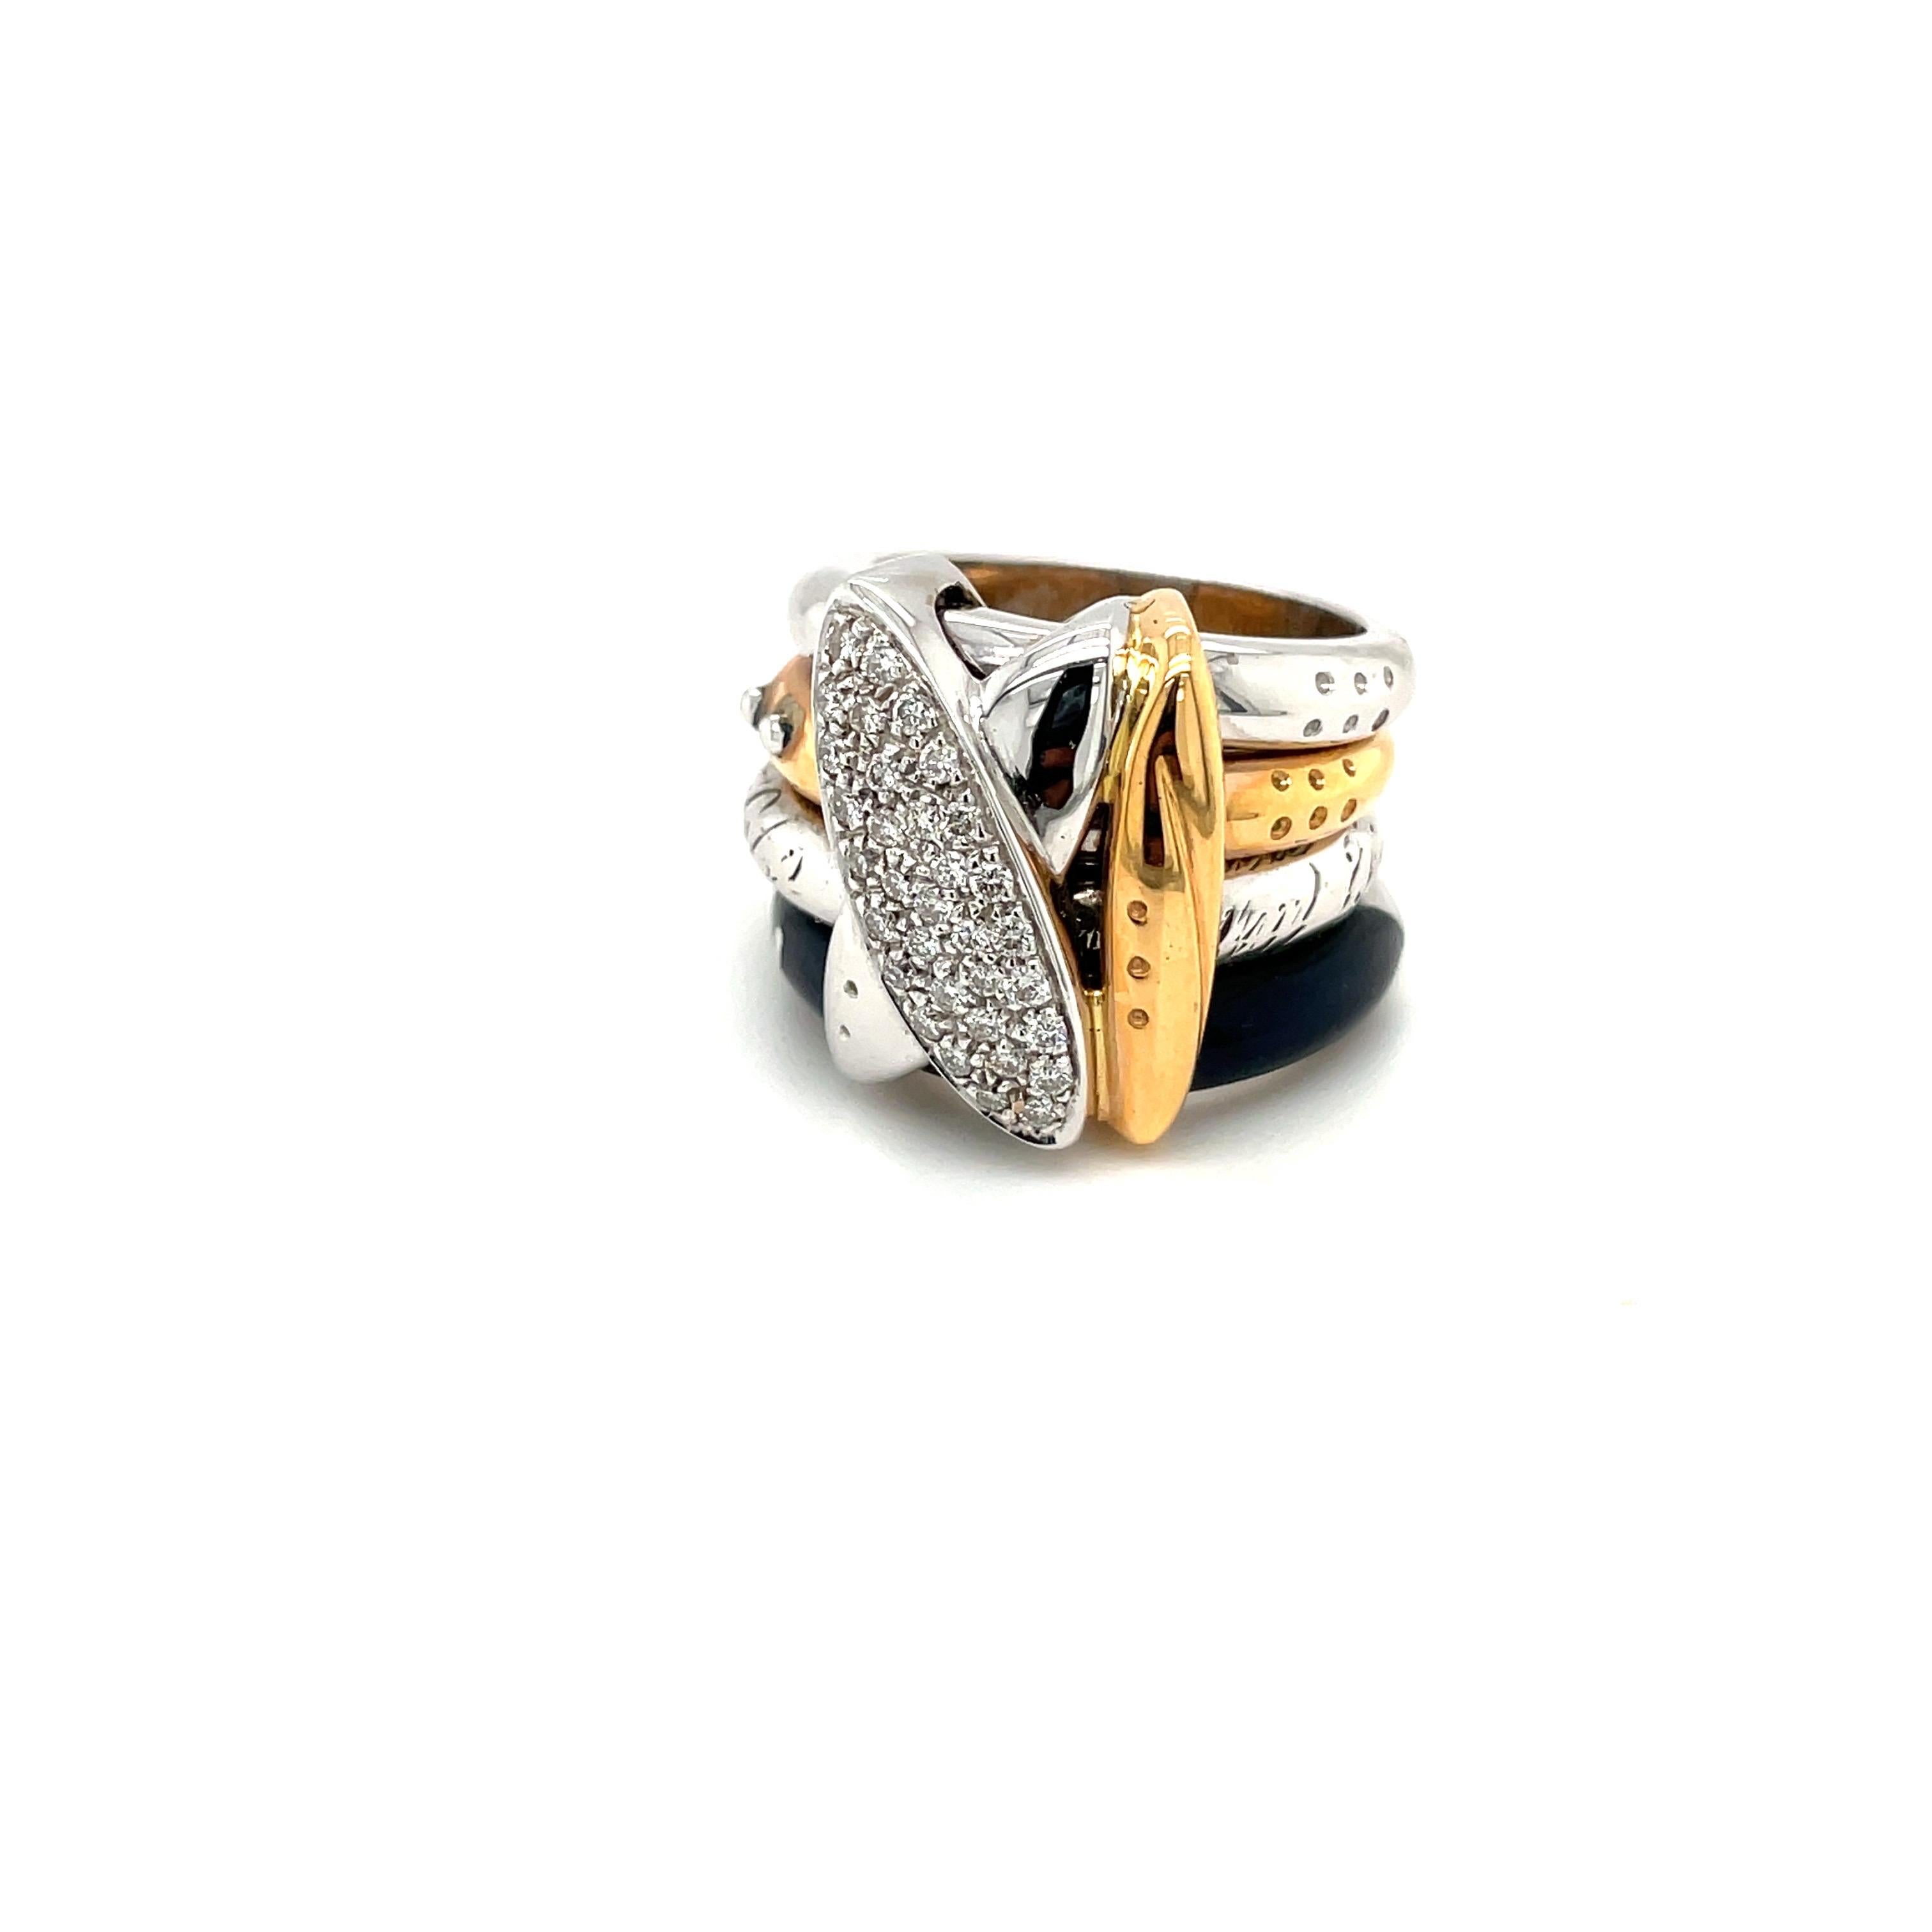 This 18 karat gold ring is designed by the world renowned Italian company La Nouvelle Bague. They are known for their exquisite craftsmanship, marrying the classic with the modern.
The ring is composed of 4 bands, 2 in white gold, 1 rose gold and 1